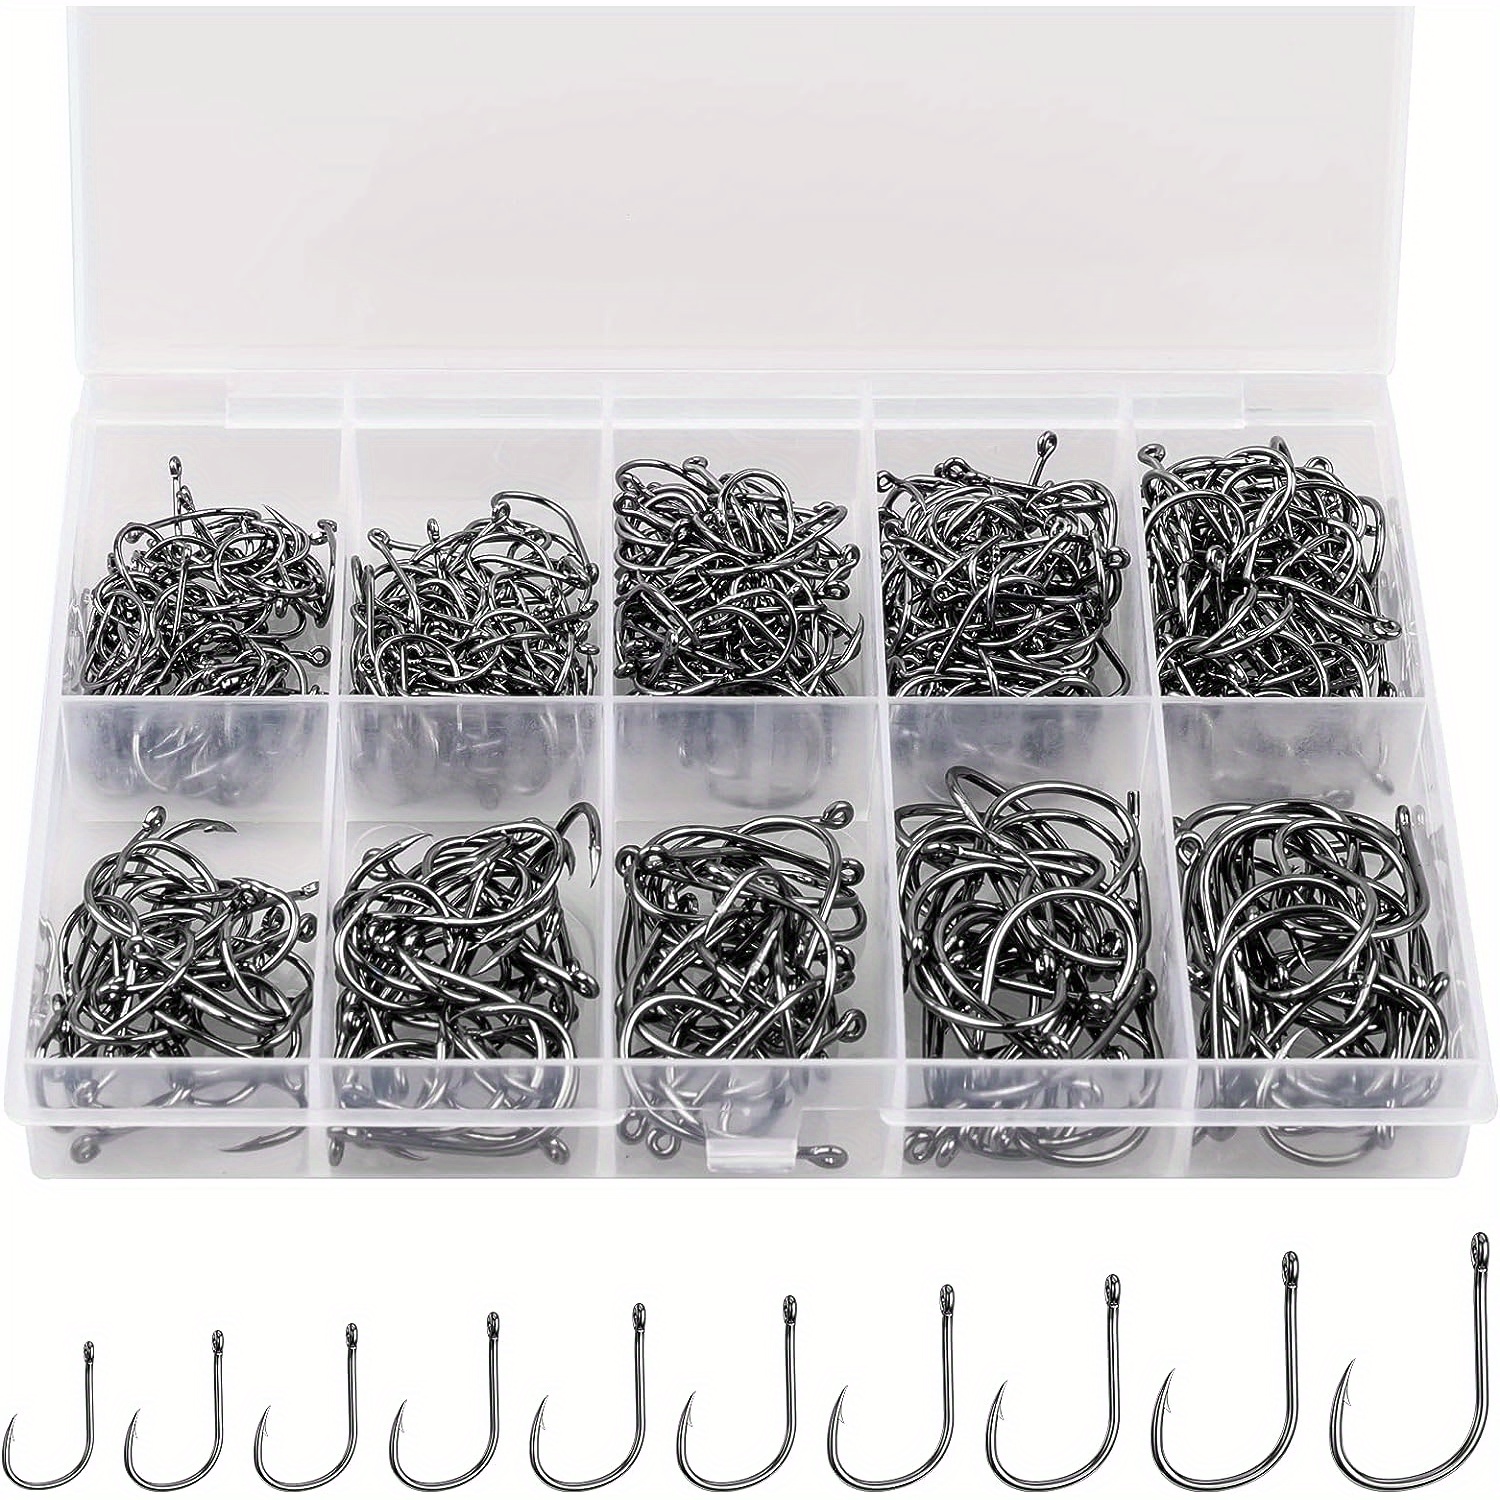 

300 Pcs Premium Fishing Hooks, 10 Sizes/4 Sizes Carbon Steel Fishing Hooks W/portable Plastic Box, Strong Sharp Fish Hook With Barbs For Freshwater/seawater